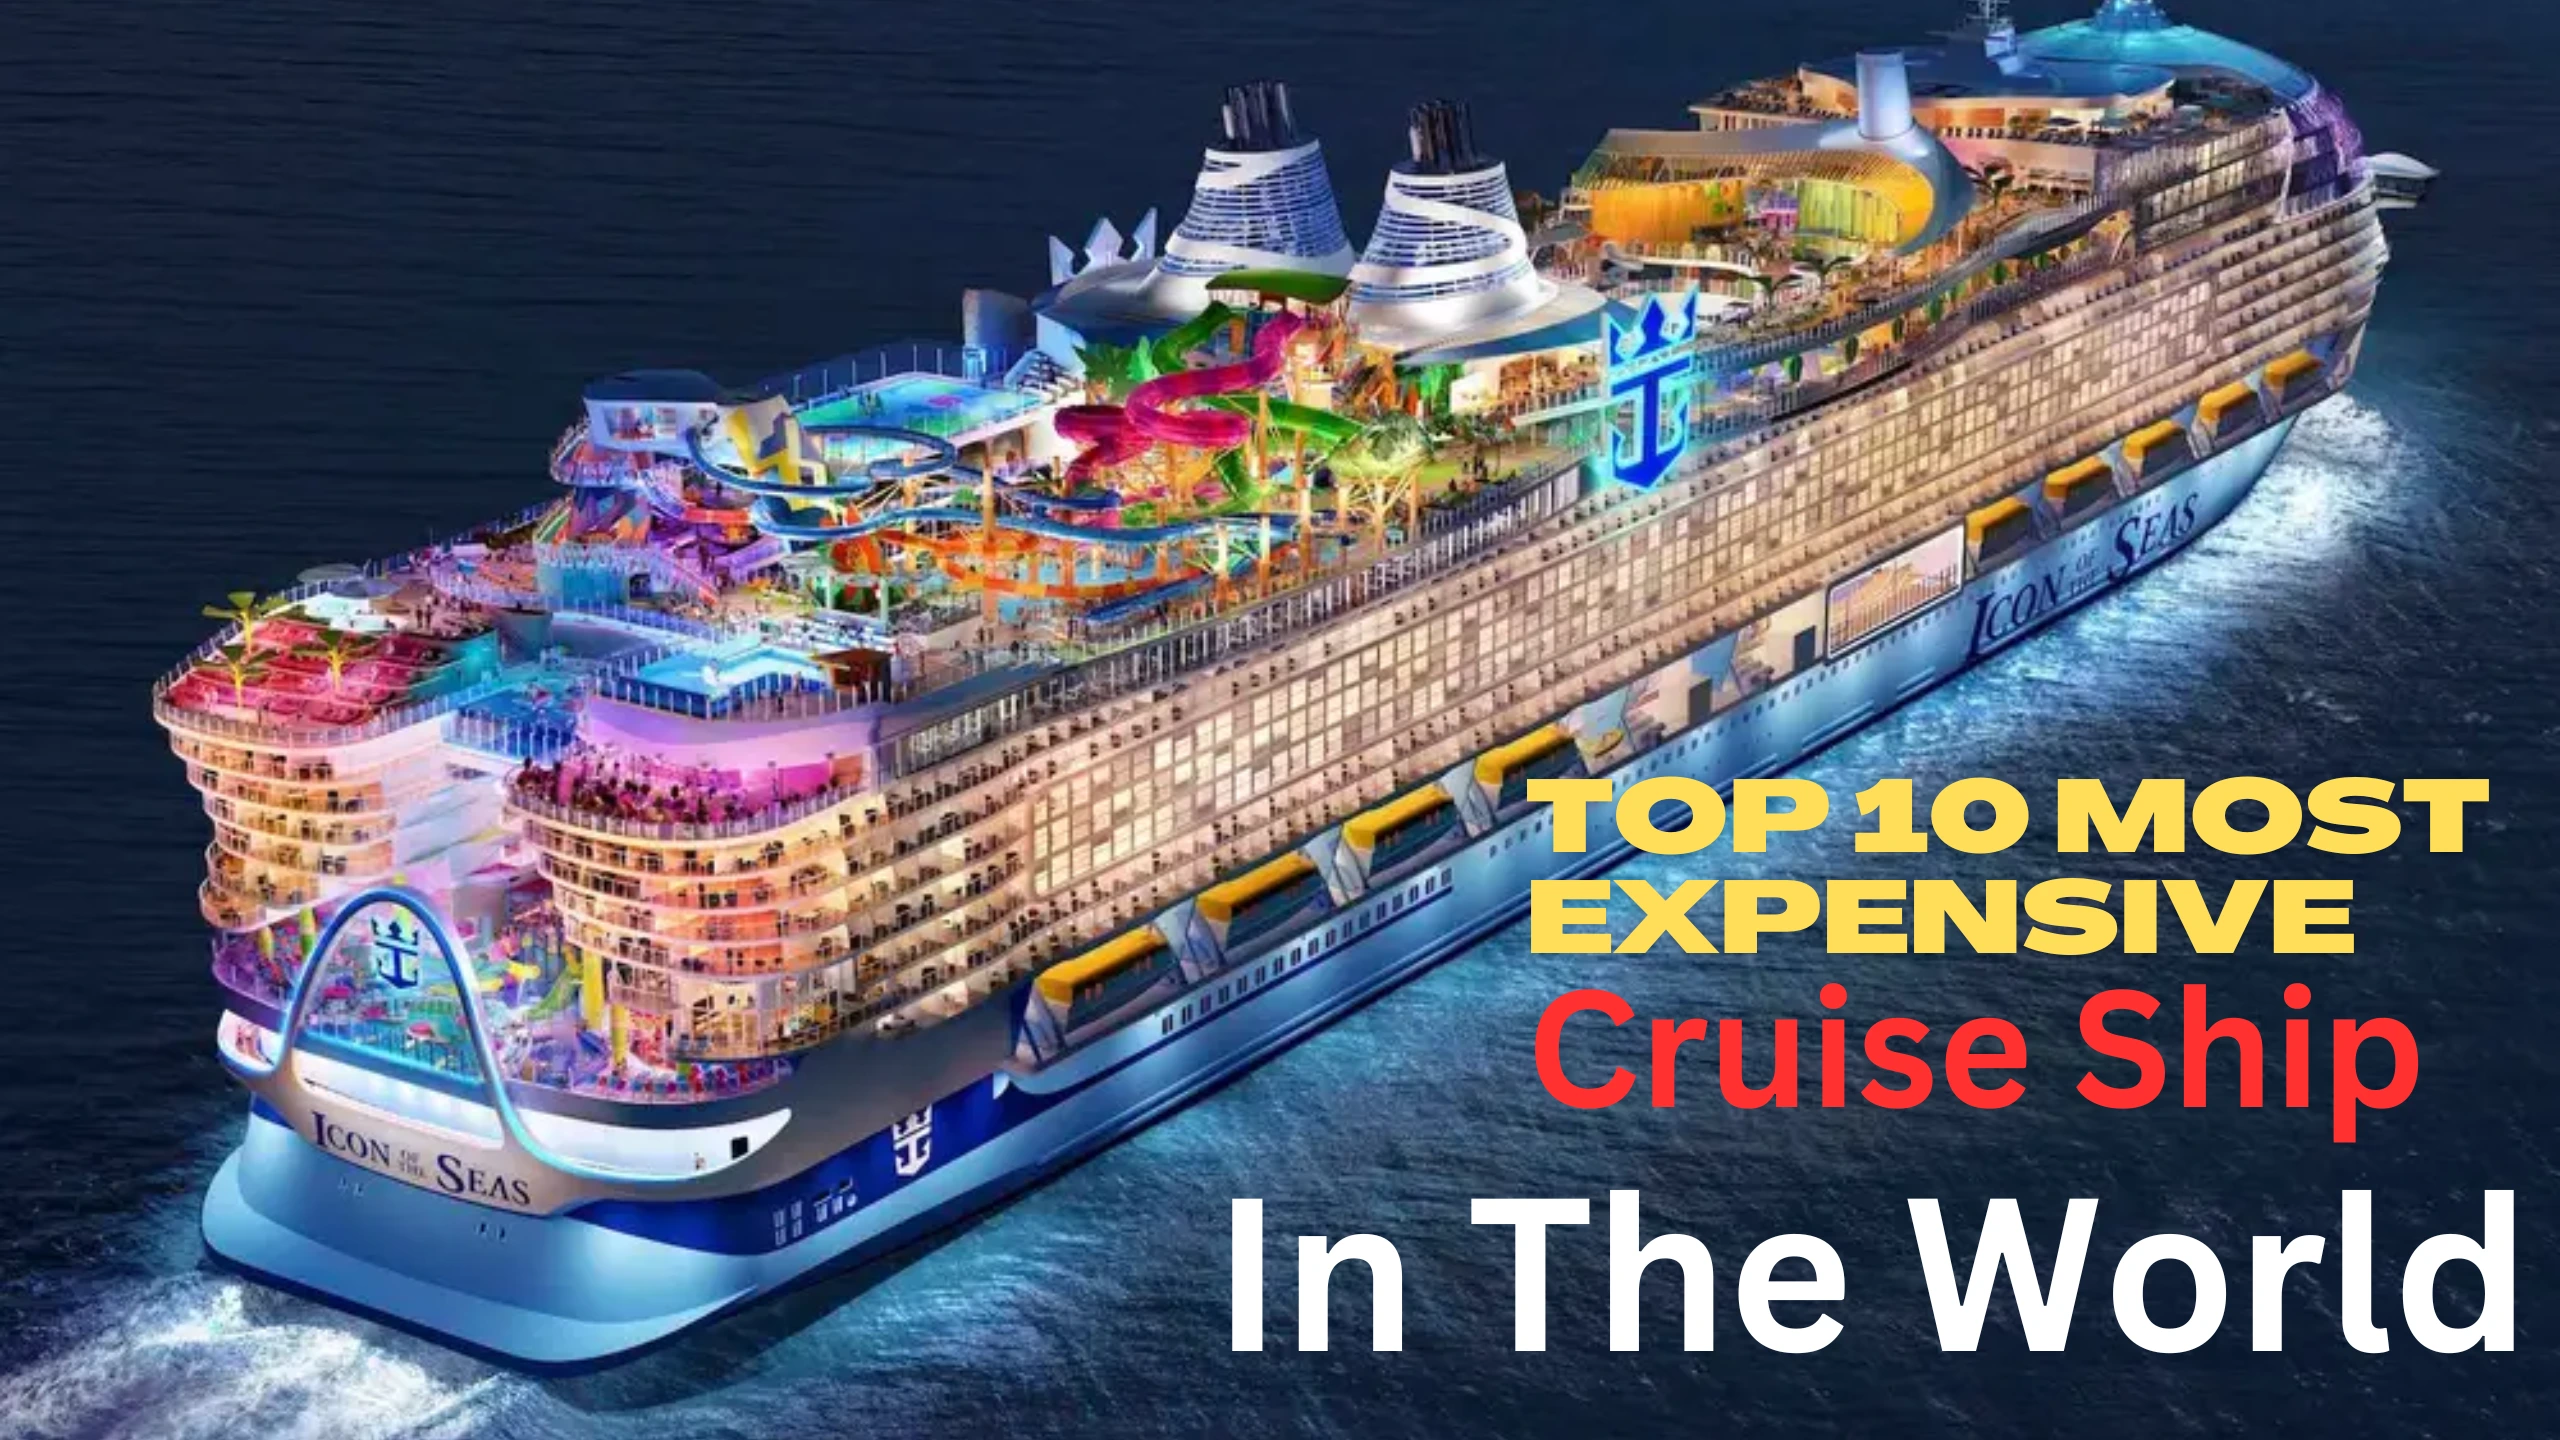 Top 10 Most Expensive Cruise Ship in The world